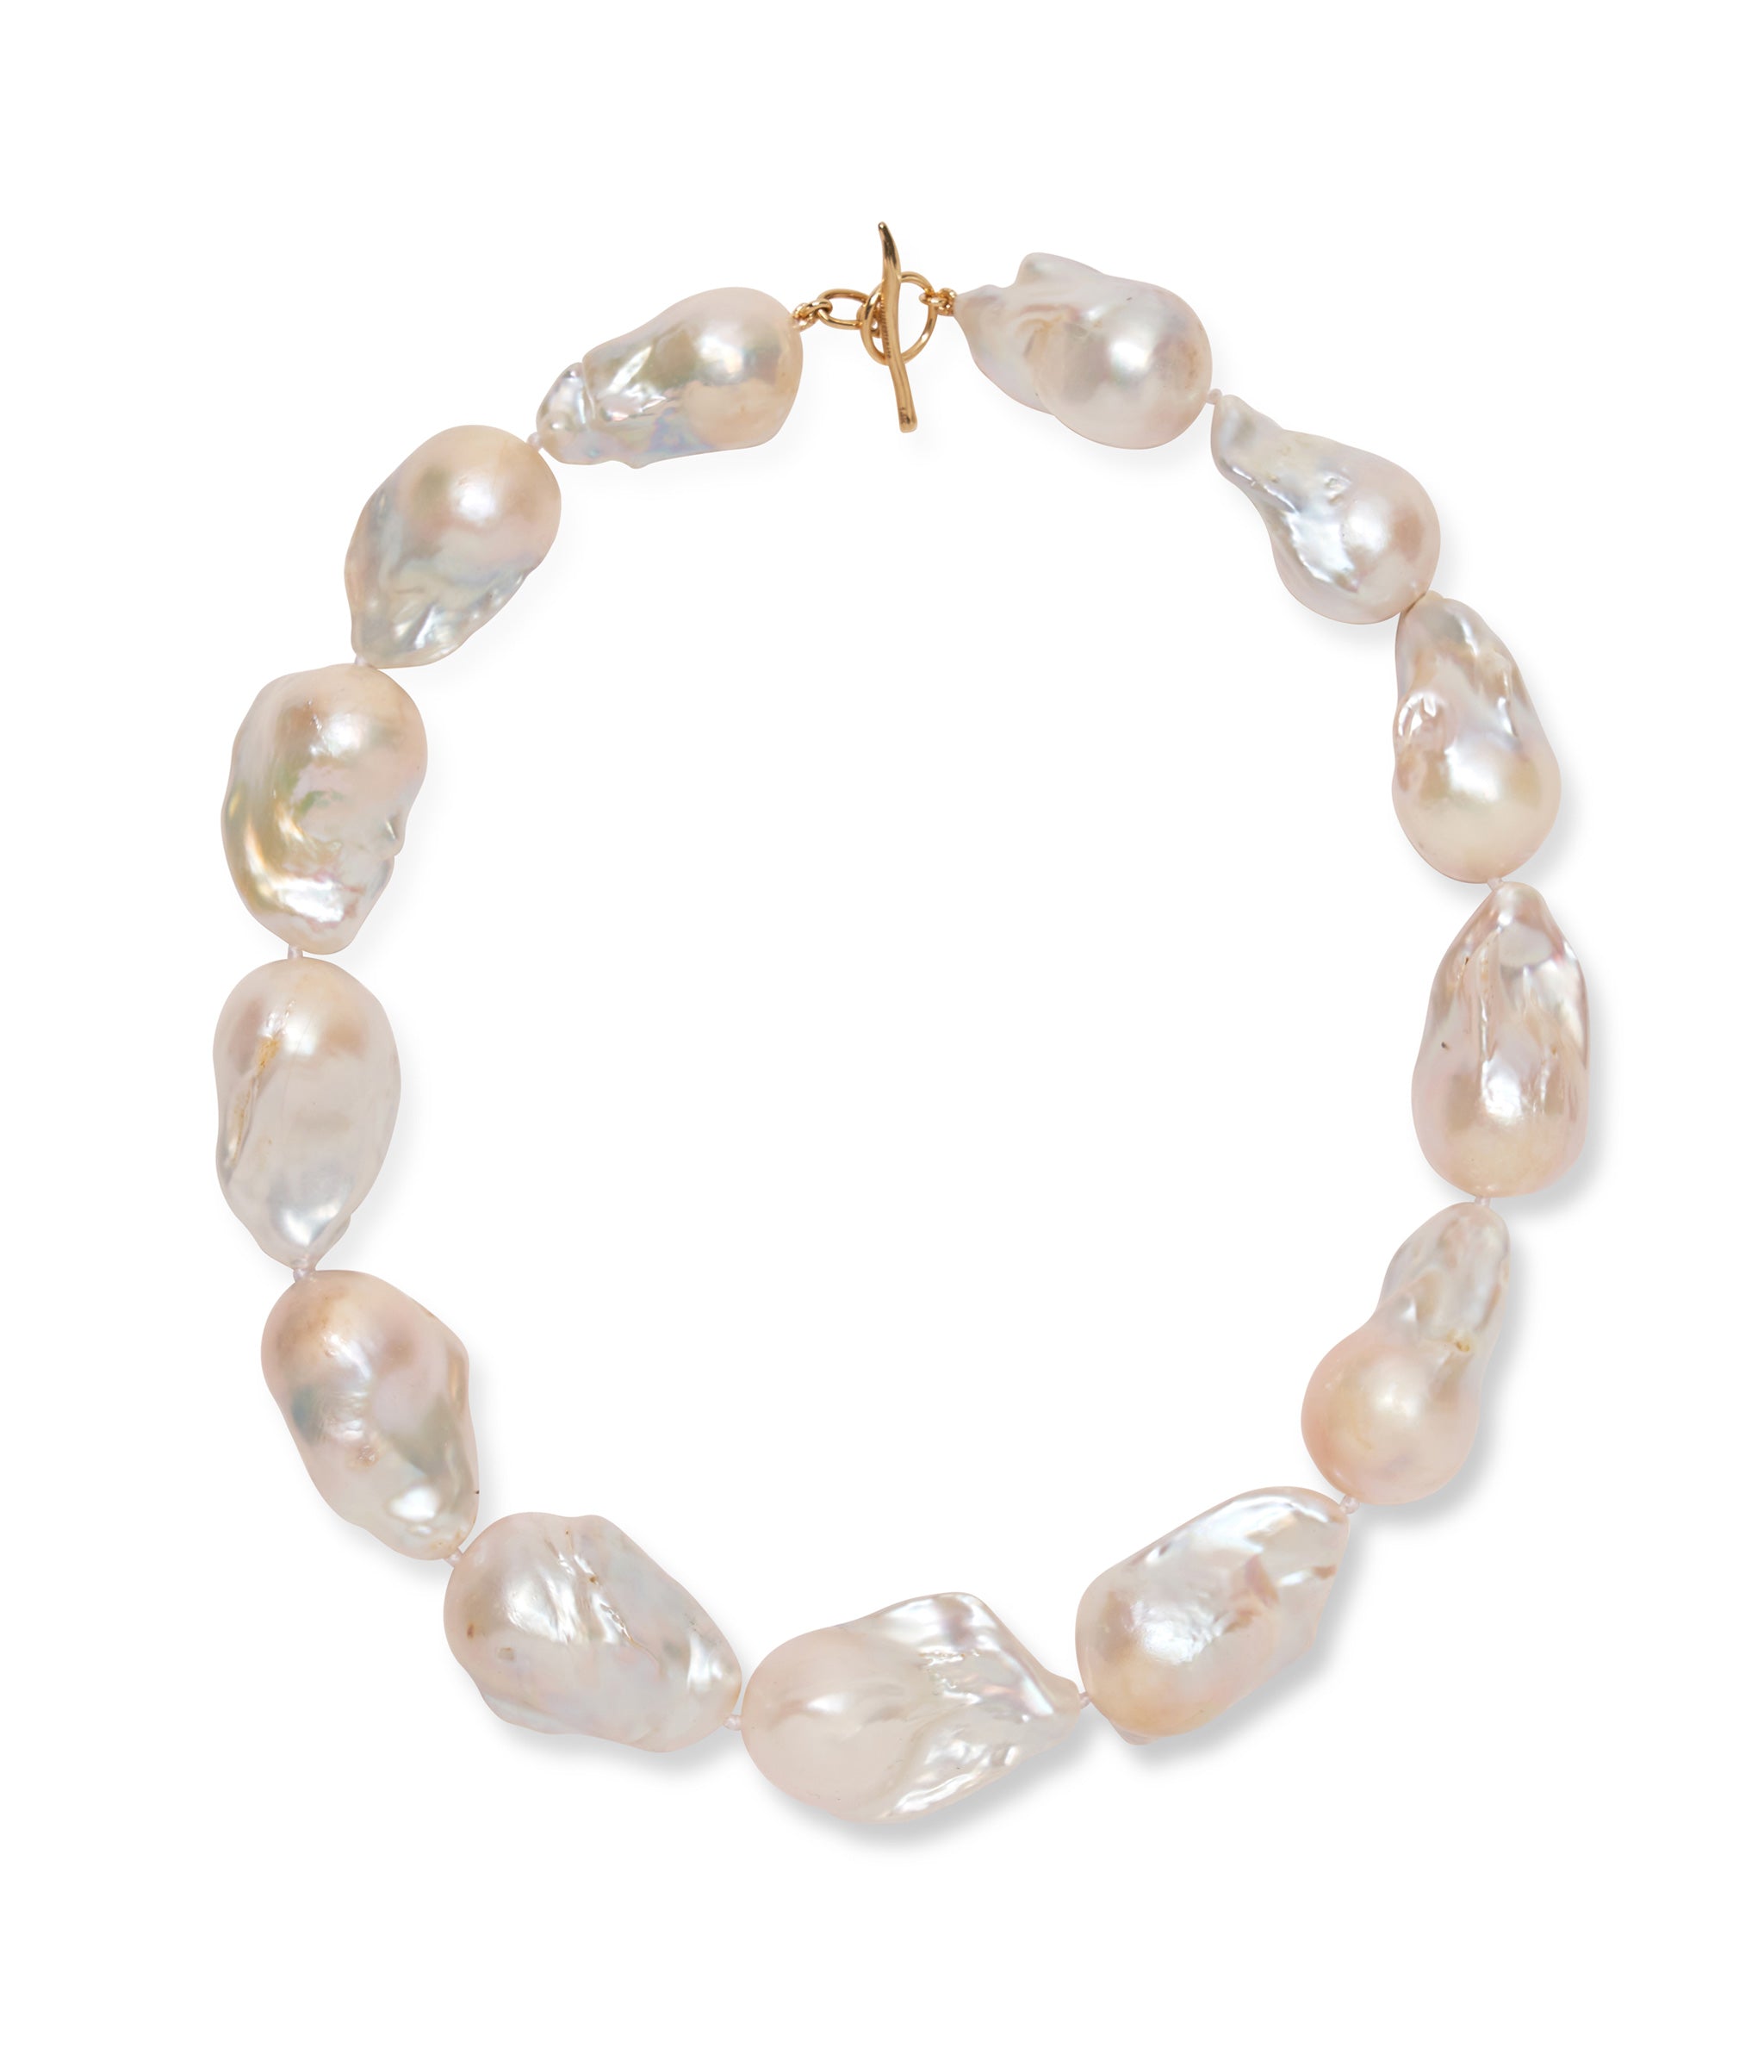 Extra Large White Baroque Pearl & 14k Gold Necklace.